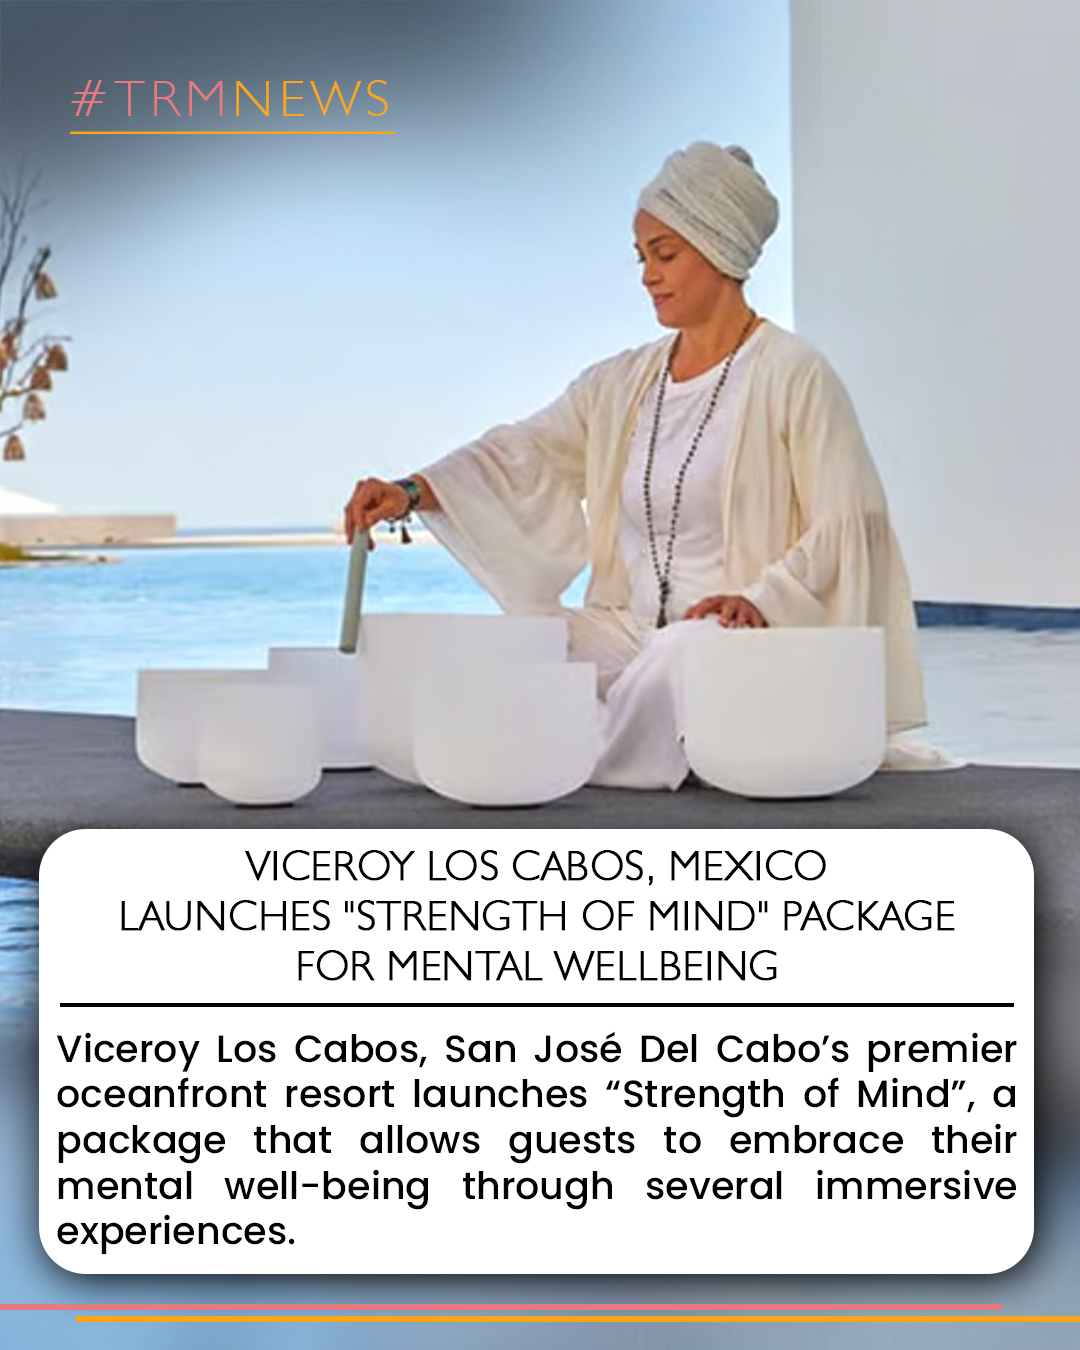 viceroy los cabos
thinkright
trm news